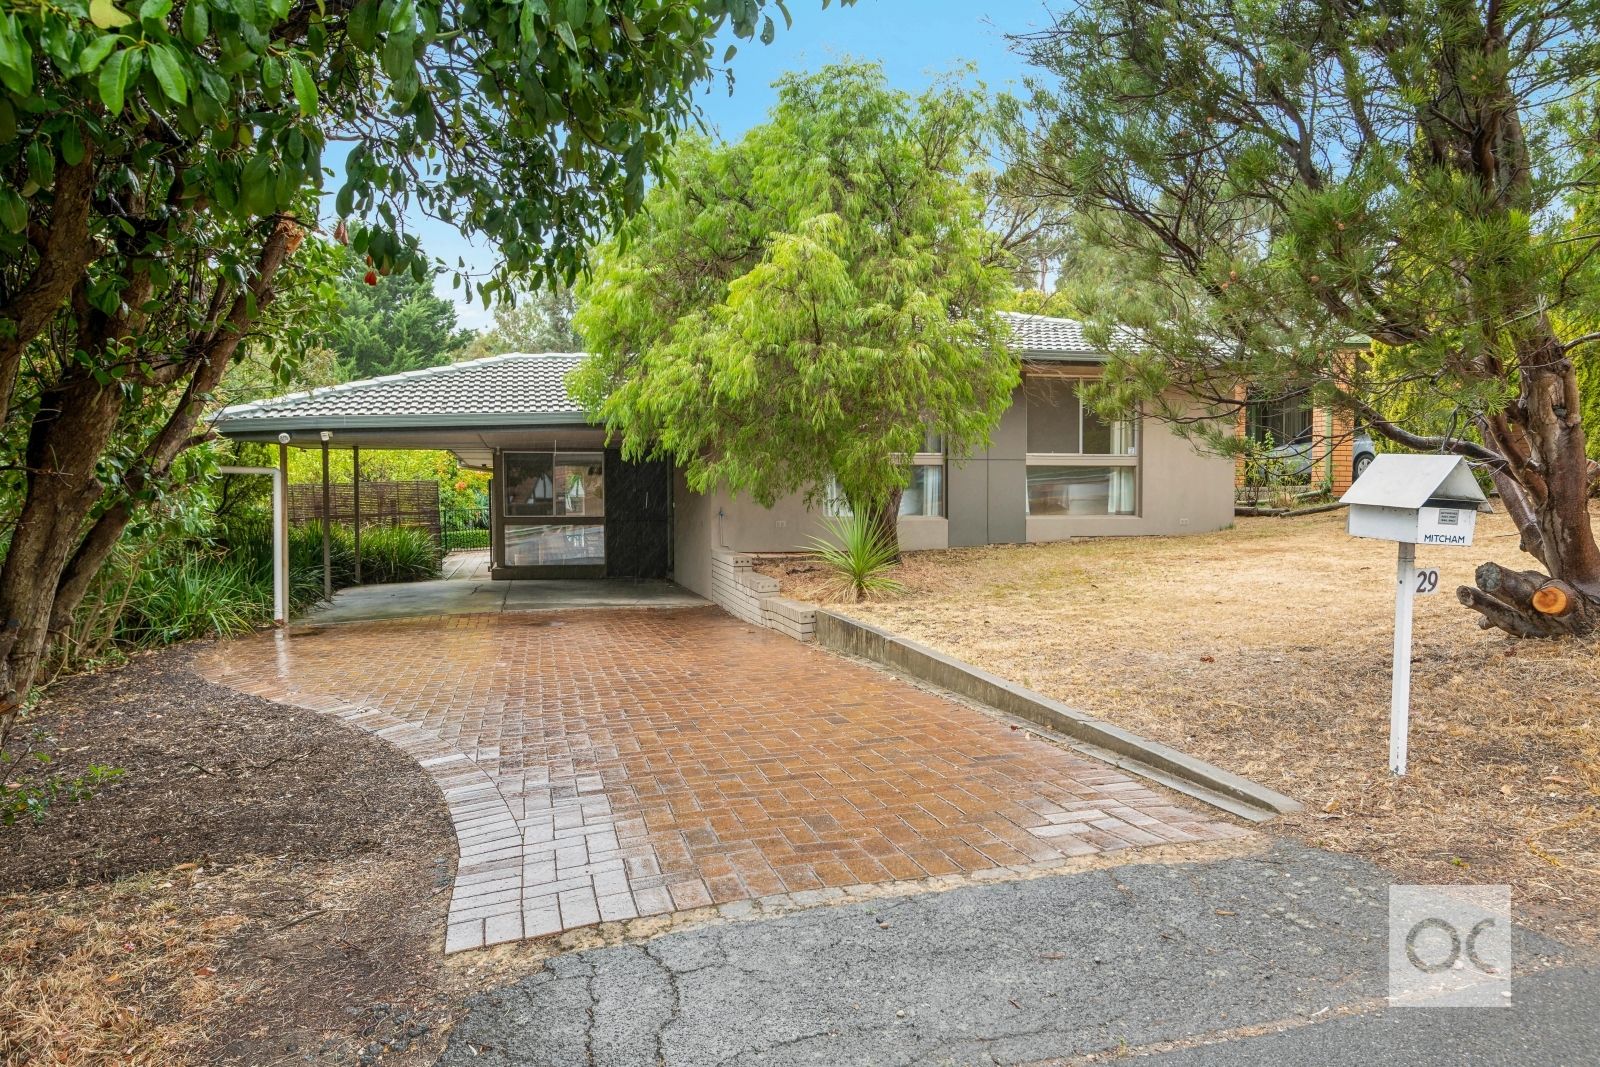 3 bedrooms House in 29 Old Belair Road MITCHAM SA, 5062